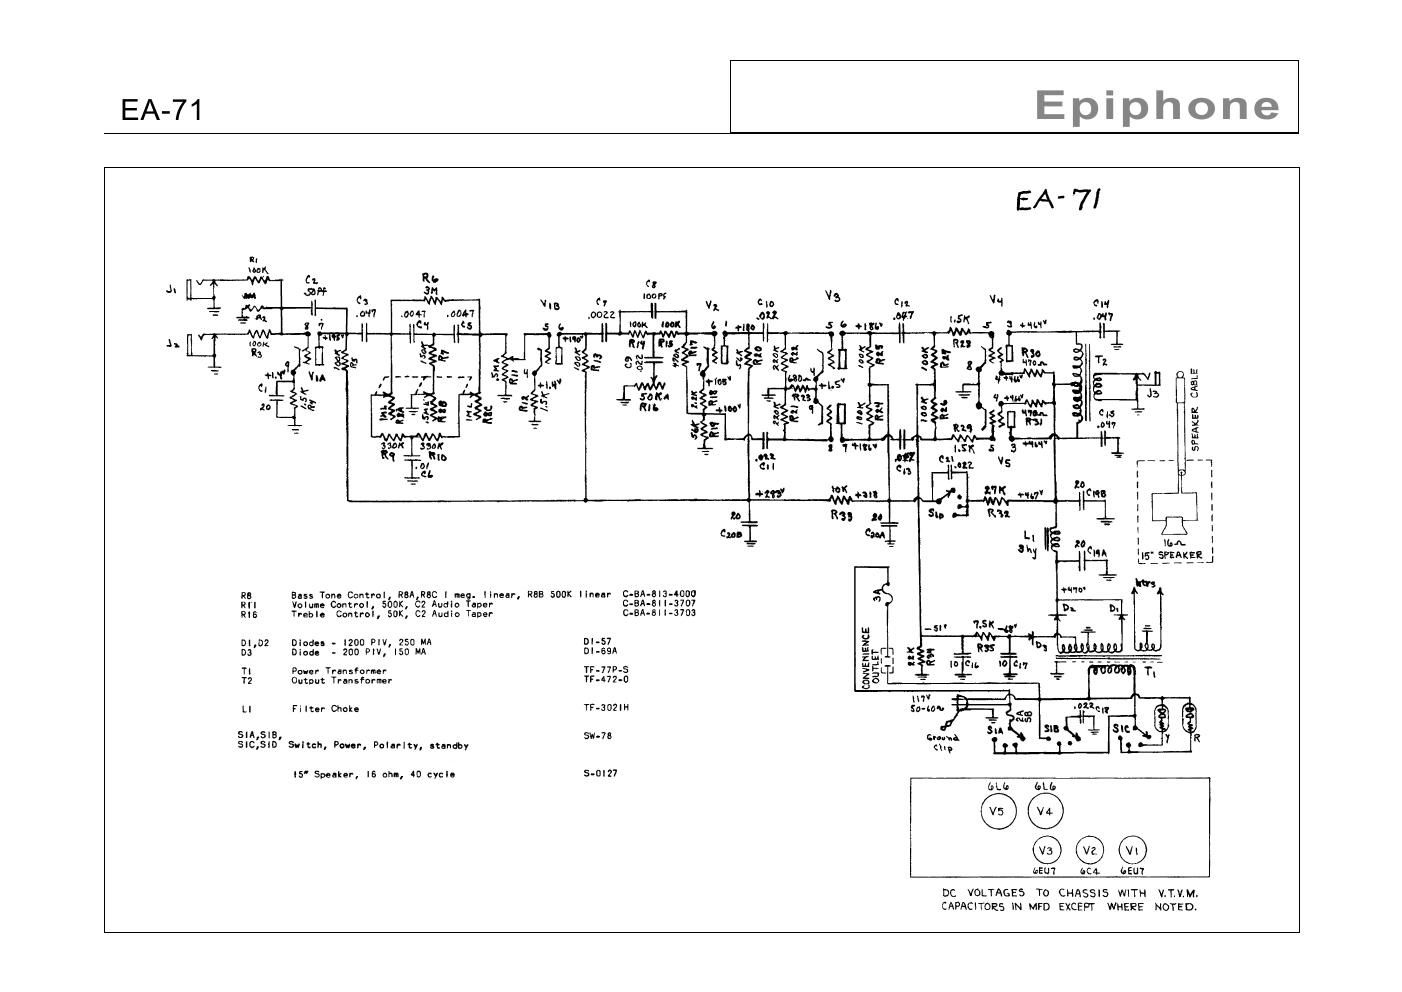 epiphone ea 71 constellation v bass amp schematic